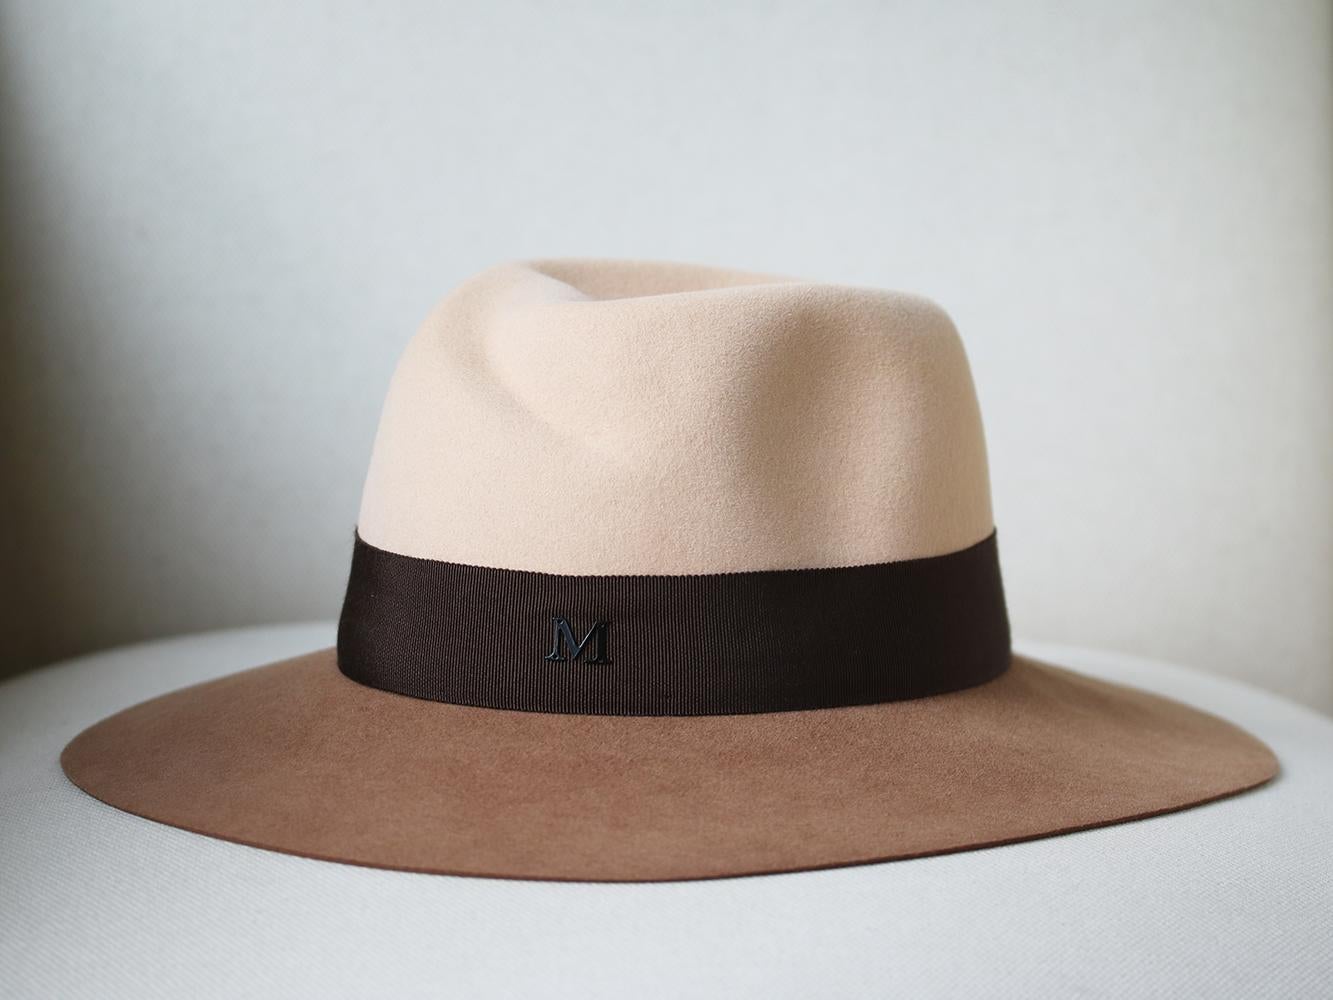 Couture millinery, Maison Michel, is renowned for its expert craftsmanship. This two-tone rabbit-felt fedora is impeccably constructed by hand and fitted with an elasticated internal brow band. The chocolate grosgrain trim is adorned with a metal